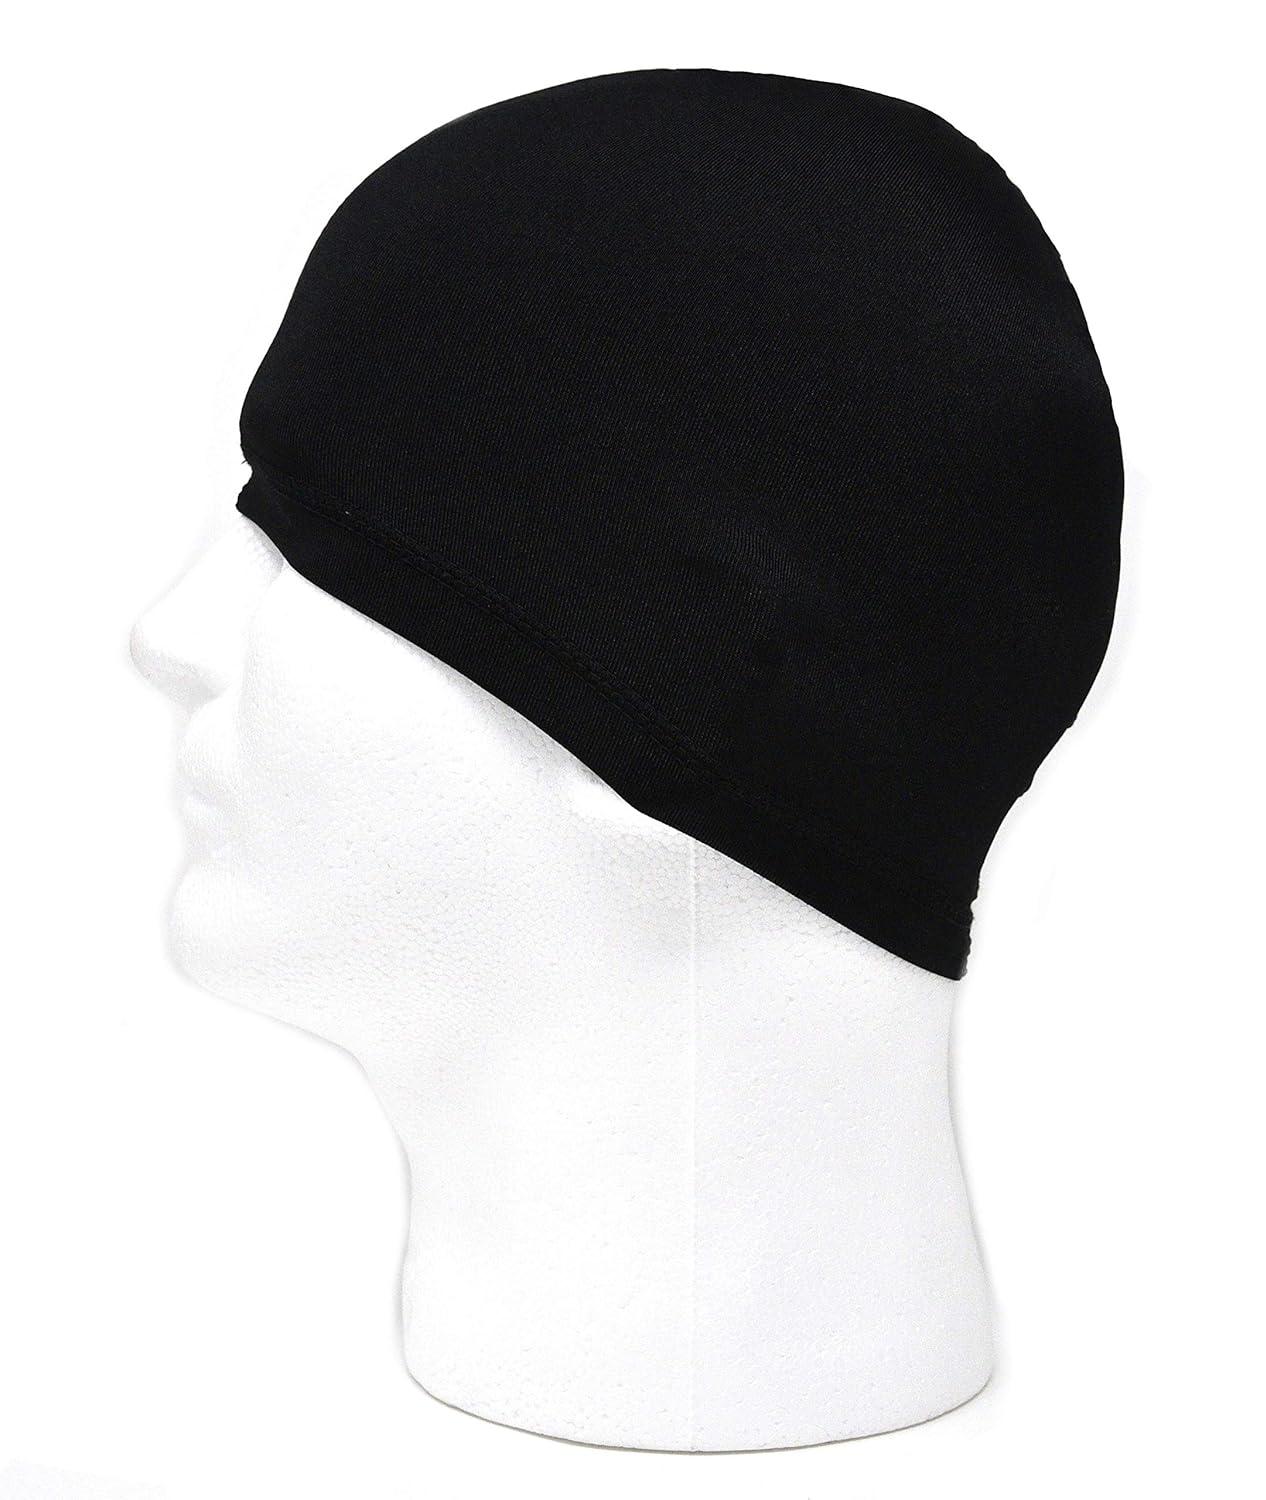 Dream Smooth Stretch SPANDEX CAP Smooth Finish Deluxe Material Color Black  (Item 031 Black) 2 pack